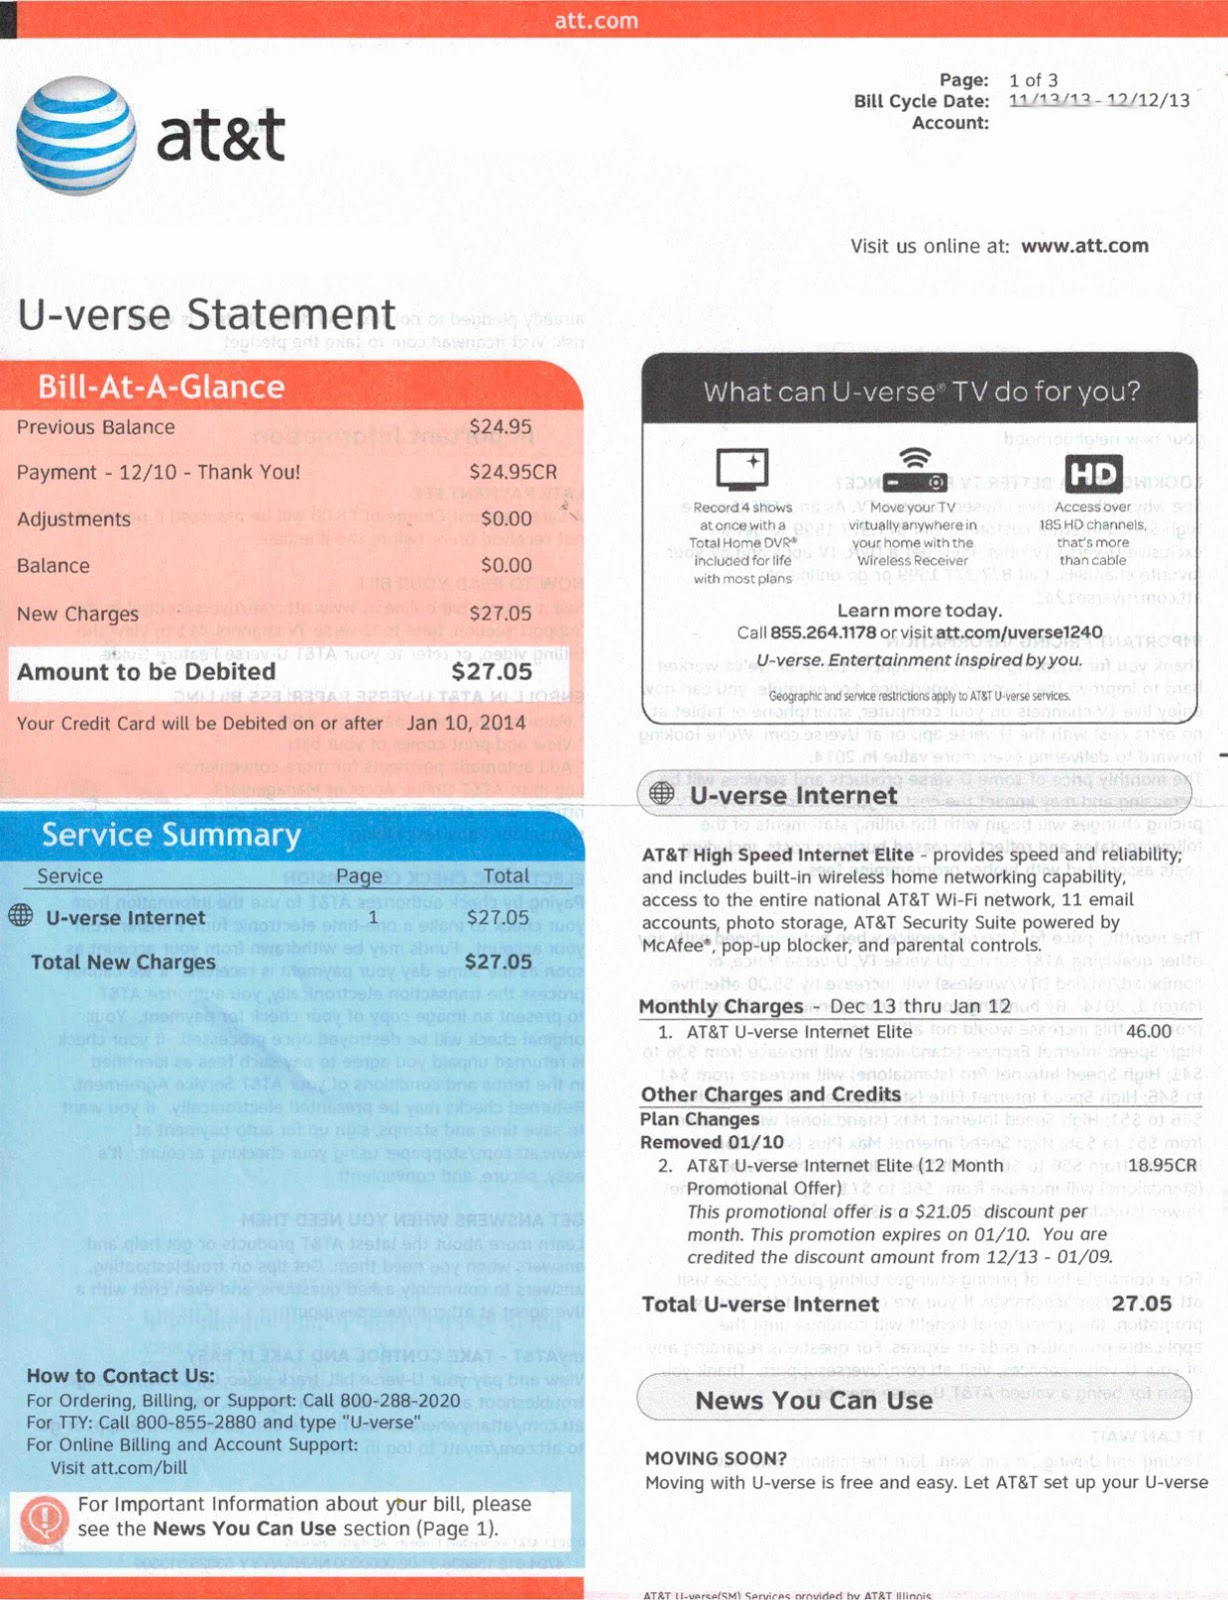 How to Renegotiate your AT&T U-Verse 1-Year Promotional Offer and Save